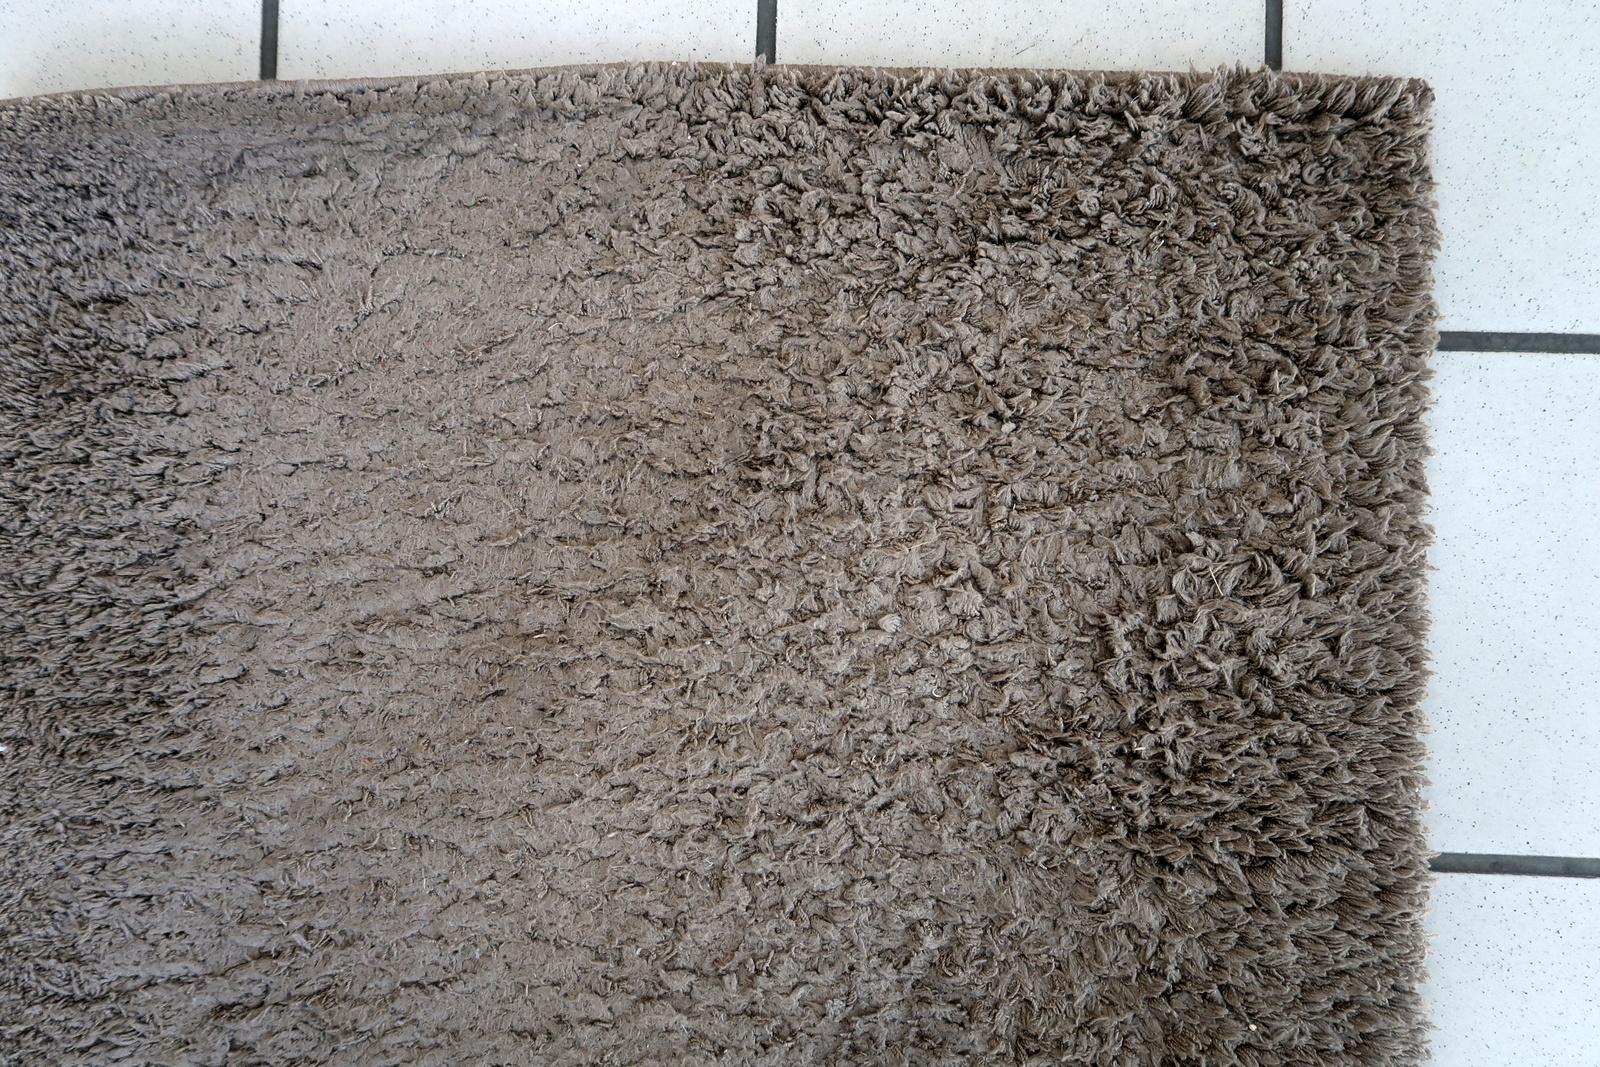 Vintage German Modern rug in grey shade. The rug has been made in the end of 20th century. It is in original good condition. The rug is machine made.

-condition: original good,

-circa: 1960s,

-size: 1.9' x 3.6' (57cm x 111cm),

-material: